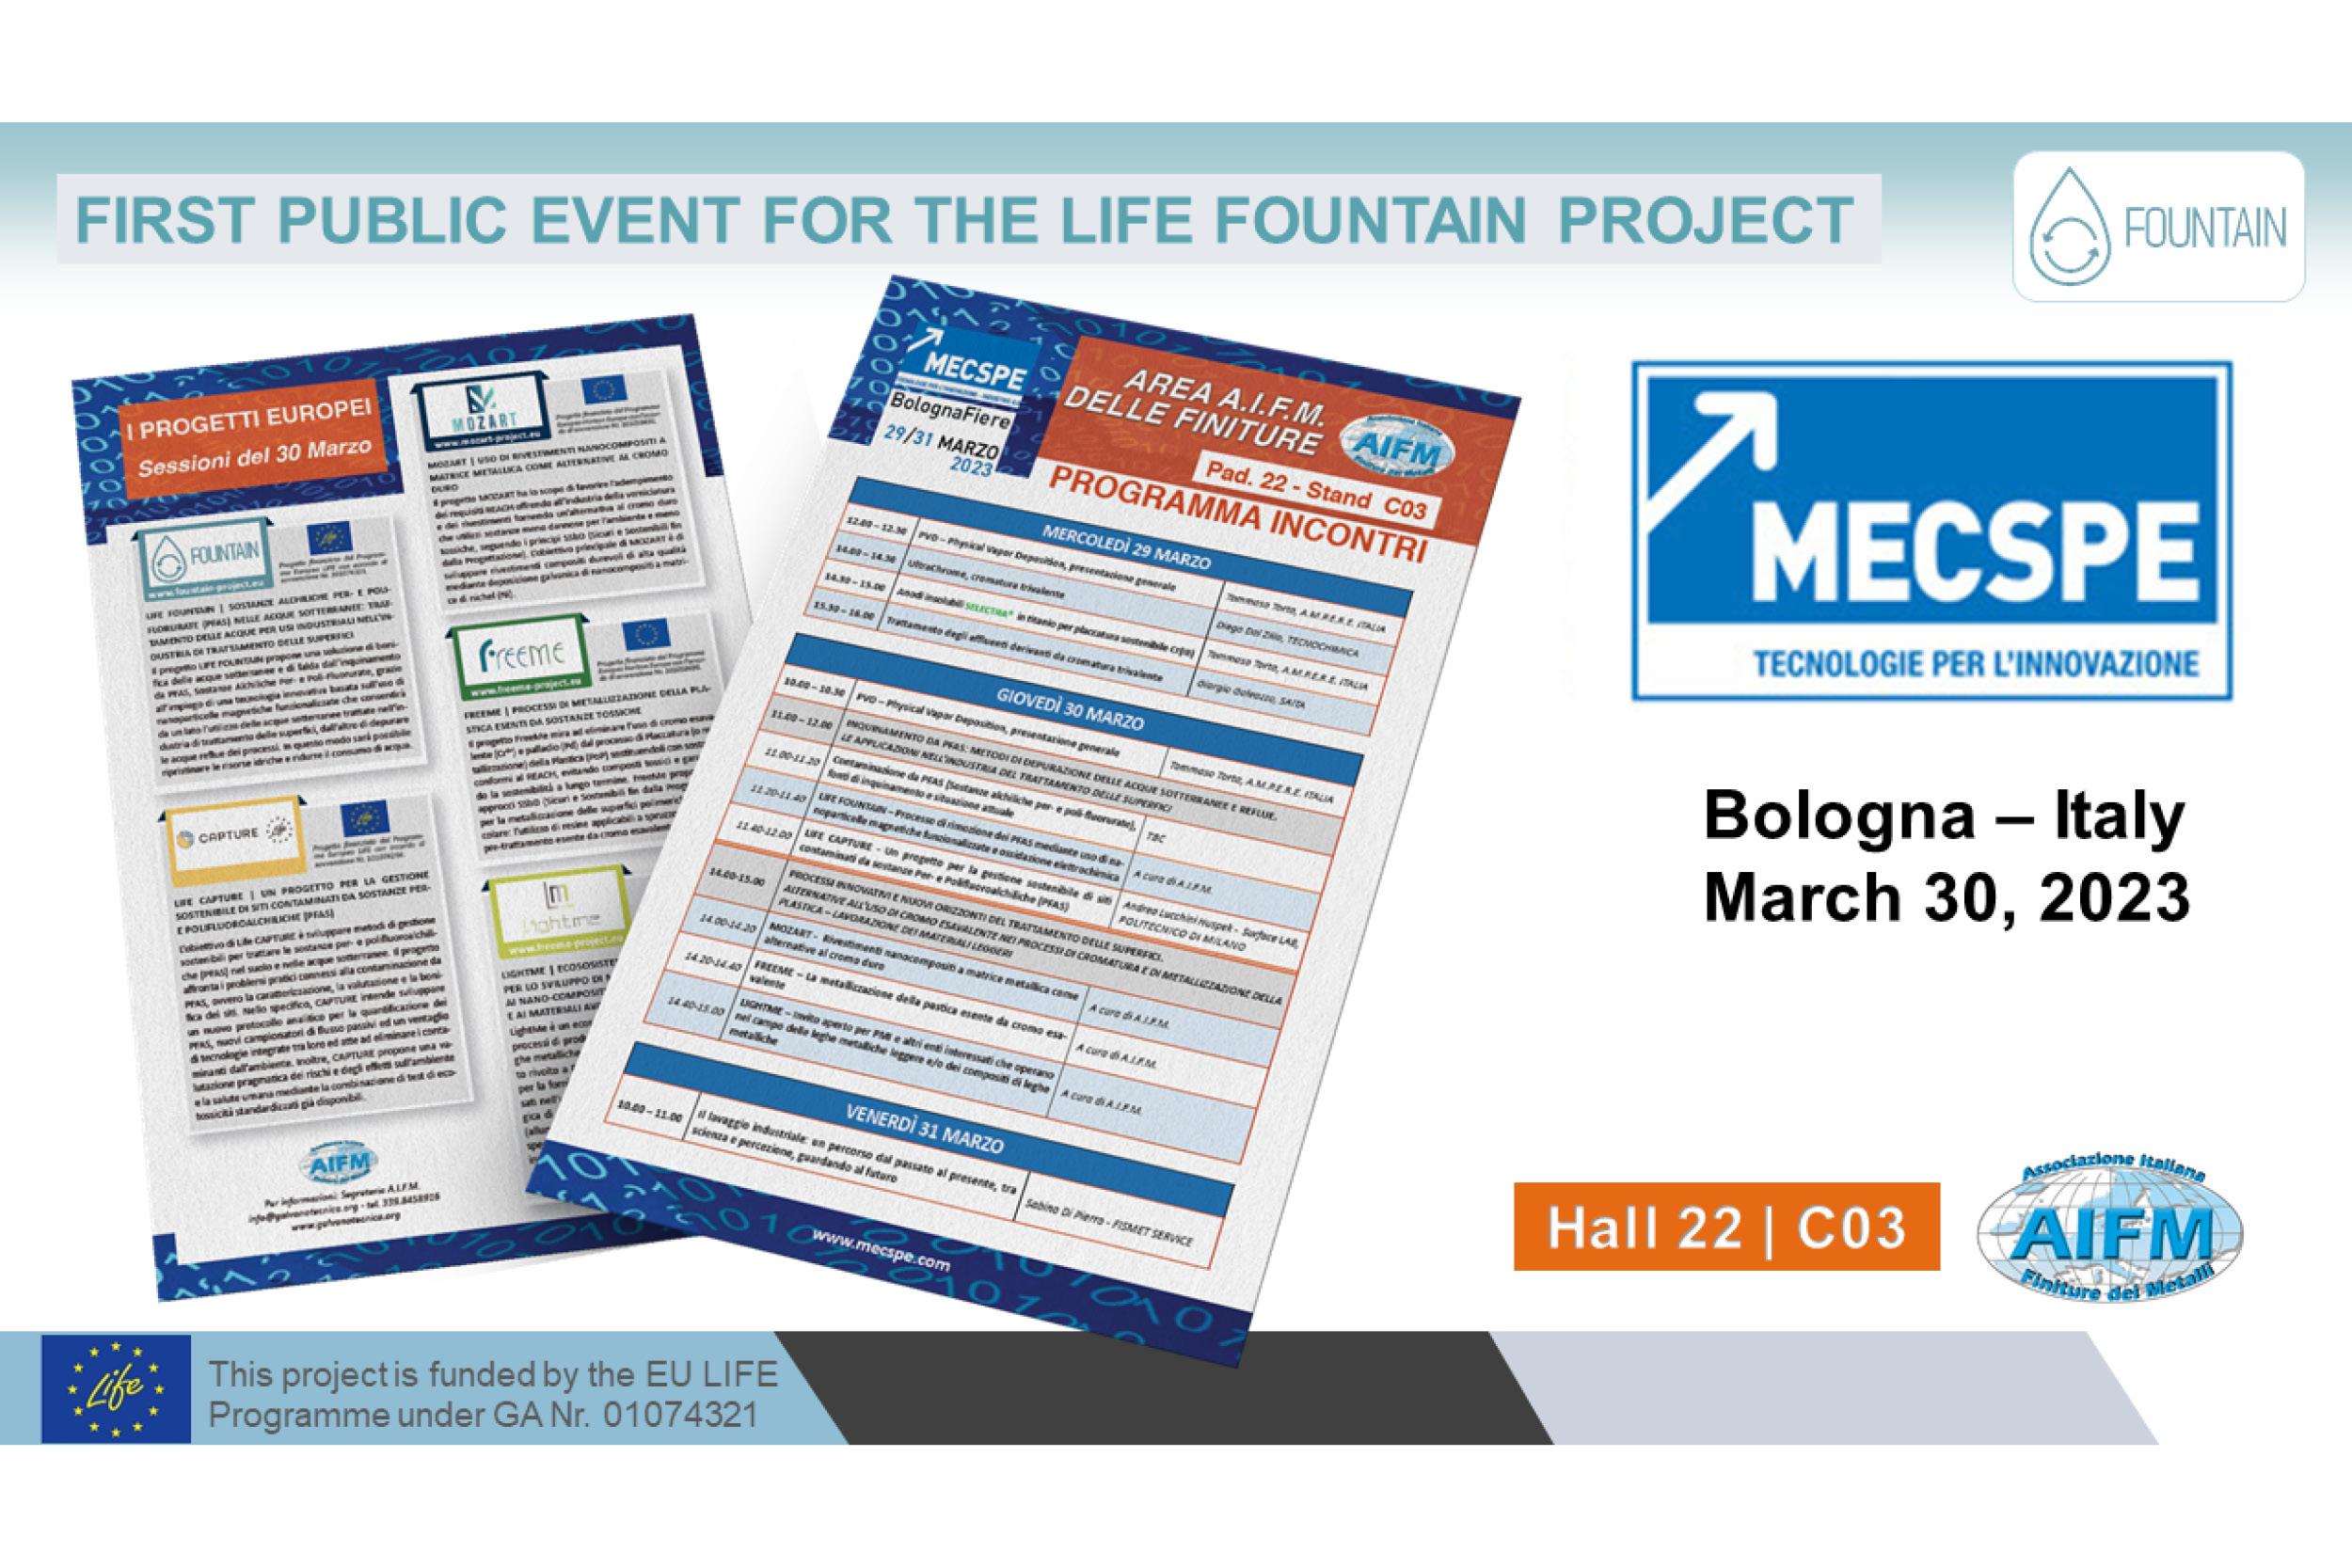 FIRST PUBLIC EVENT - THE PROJECT WILL BE PRESENTED AT MECSPE, MARCH 30 - BOLOGNA (ITALY)